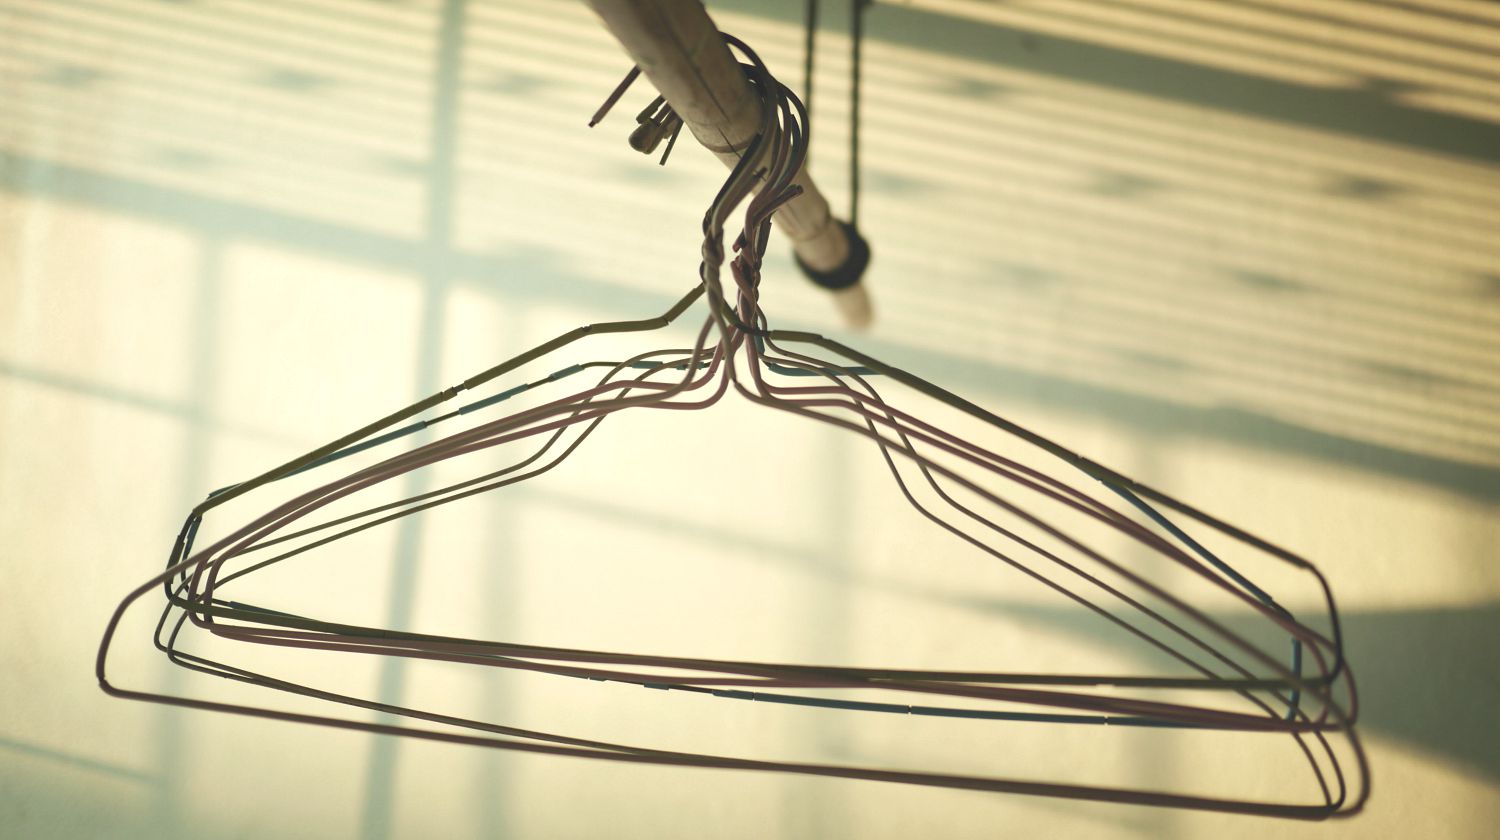 Feature | Hanging wire hanger | Ways To Use A Wire Coat Hanger For Survival